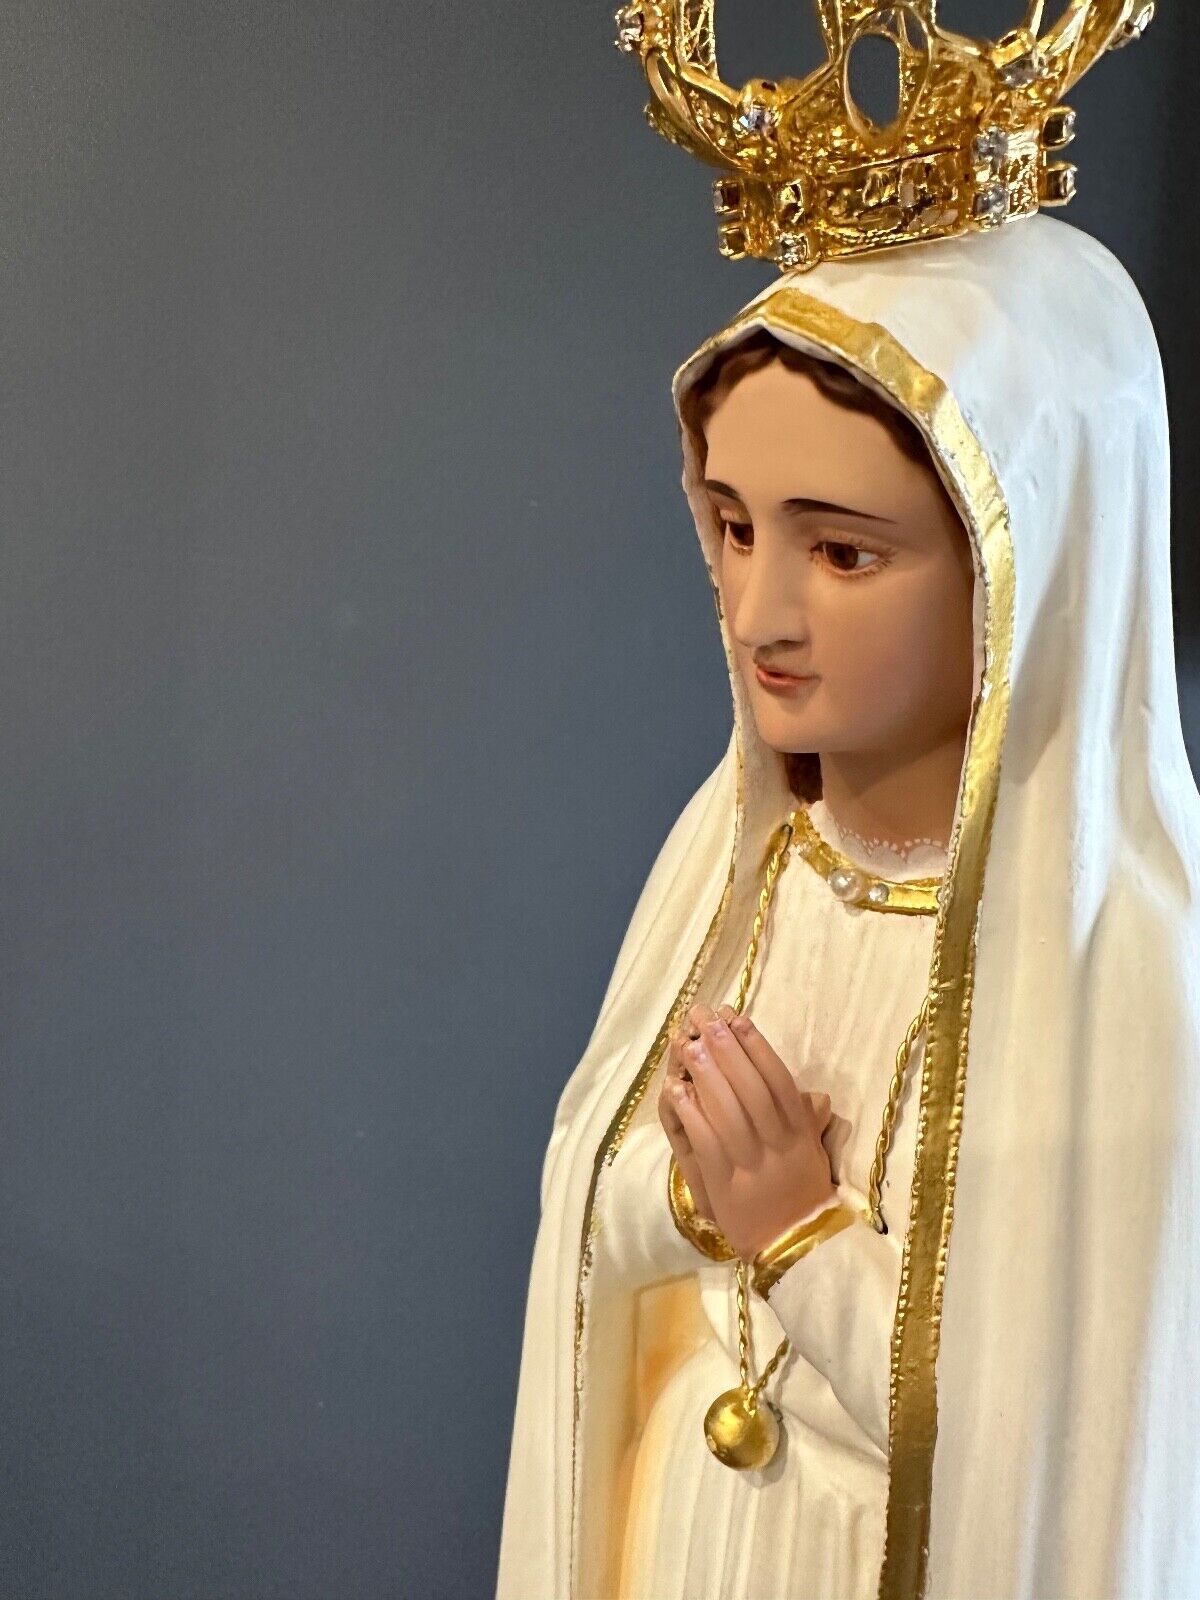 Our Lady of Fatima w/ Crown